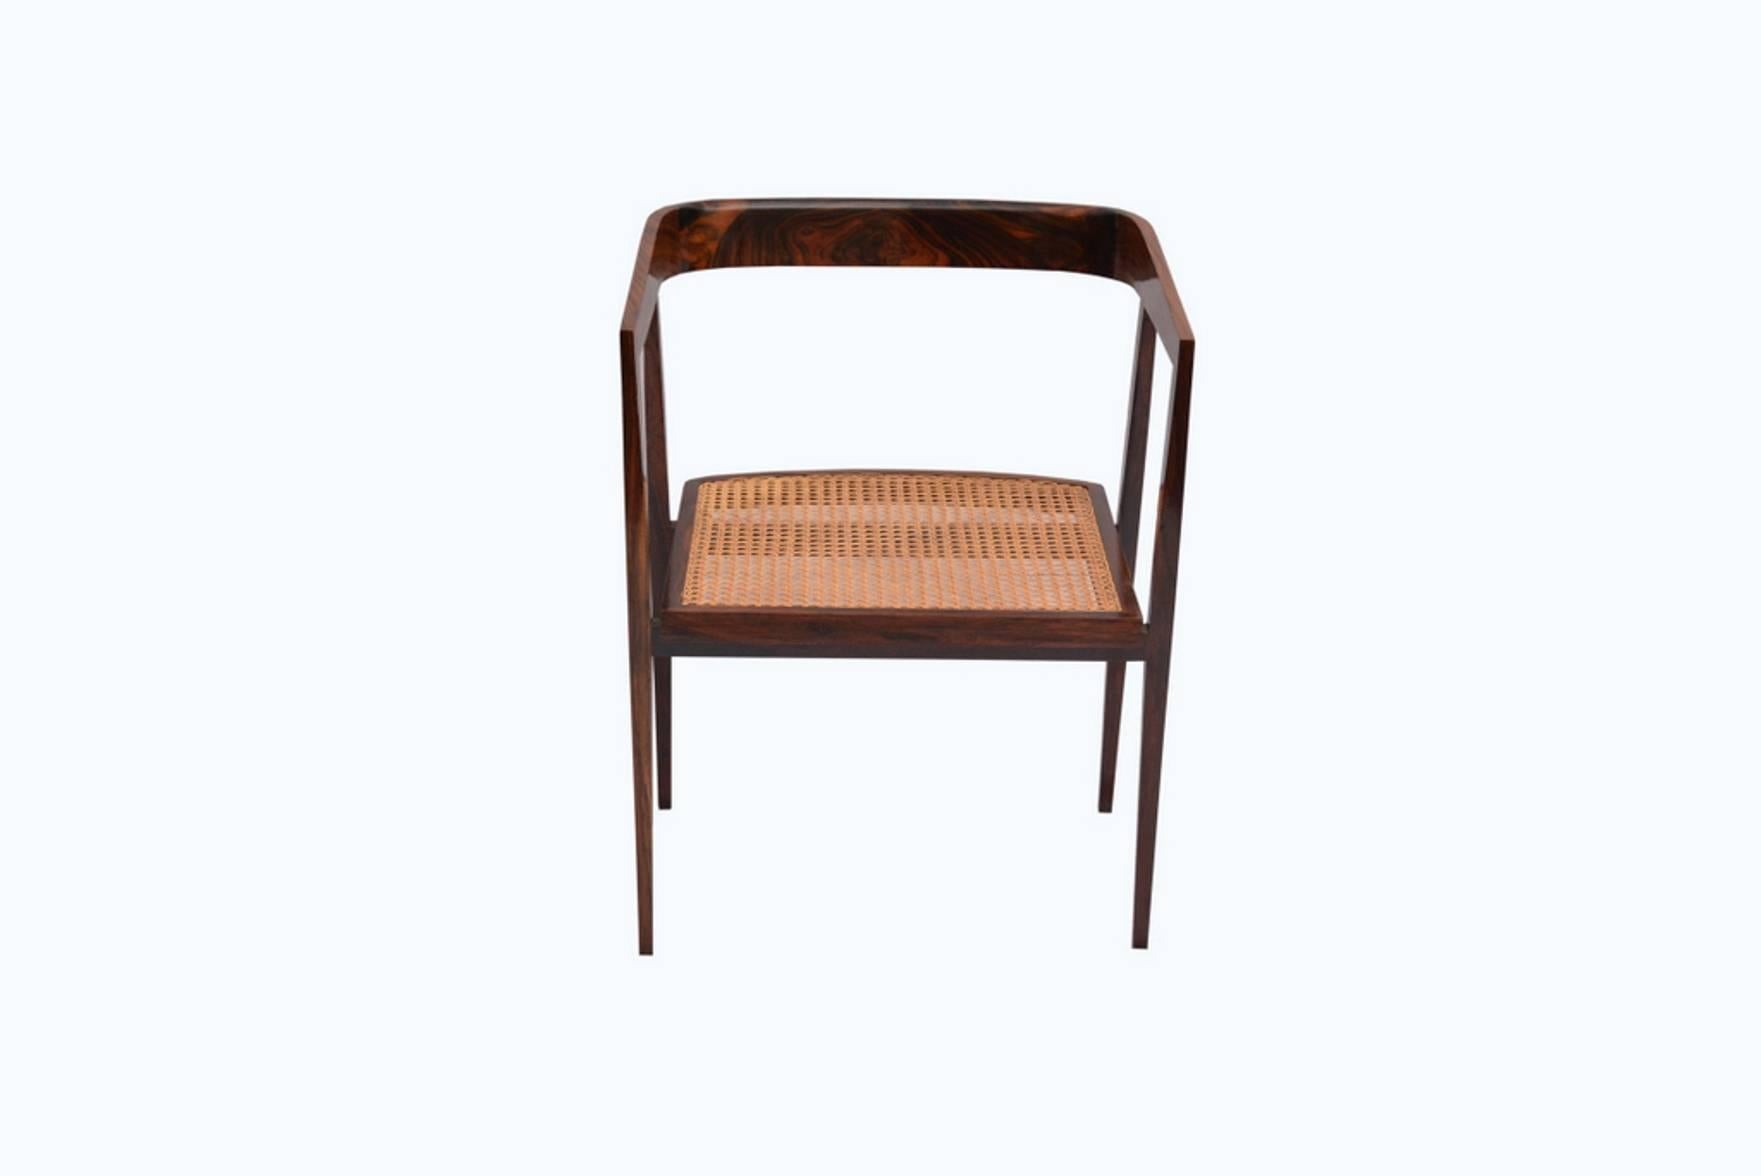 Original Joaquim Tenreiro armchairs, produced in 1960 in Jacaranda wood and caned seat. With age appropriate wear. It can be bought in sets of 4 units or total of 8 units.